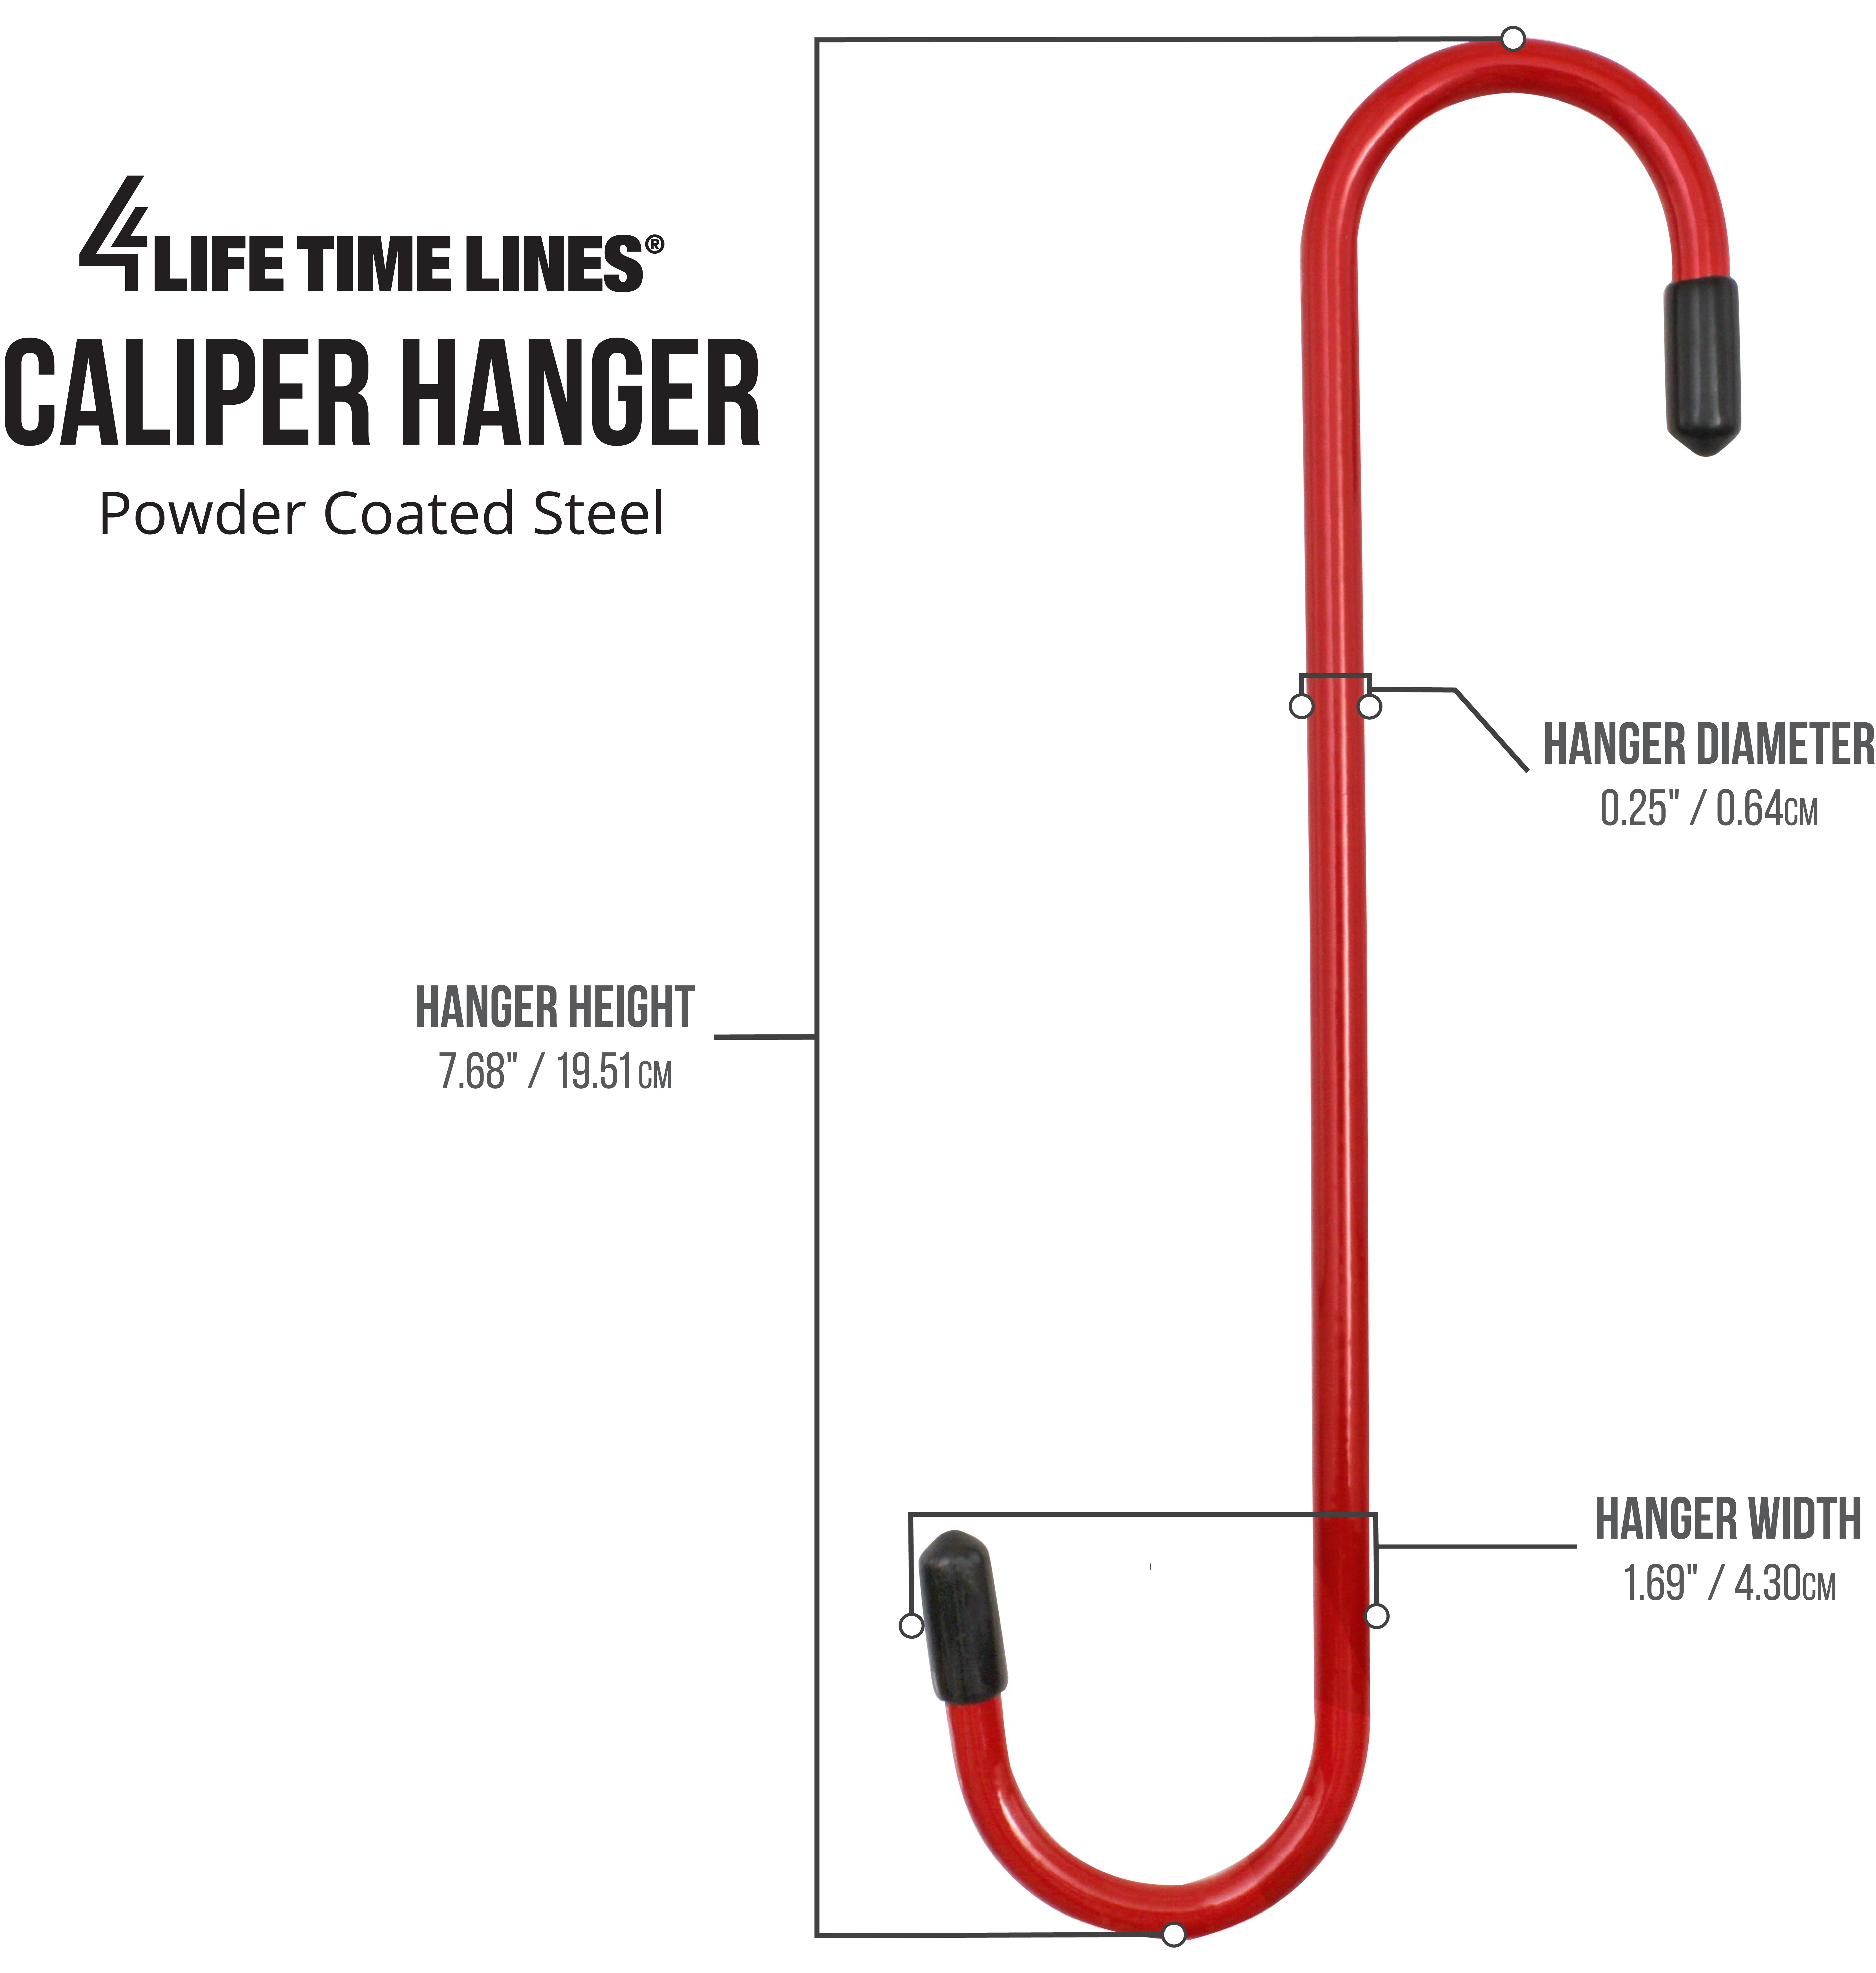 4LIFETIMELINES Brake Caliper Hanger Hooks Durable Steel Red Powder Coated with Rubber Tips 2 Pack for Automotive Work on Brake Axle and Suspesion Systems 